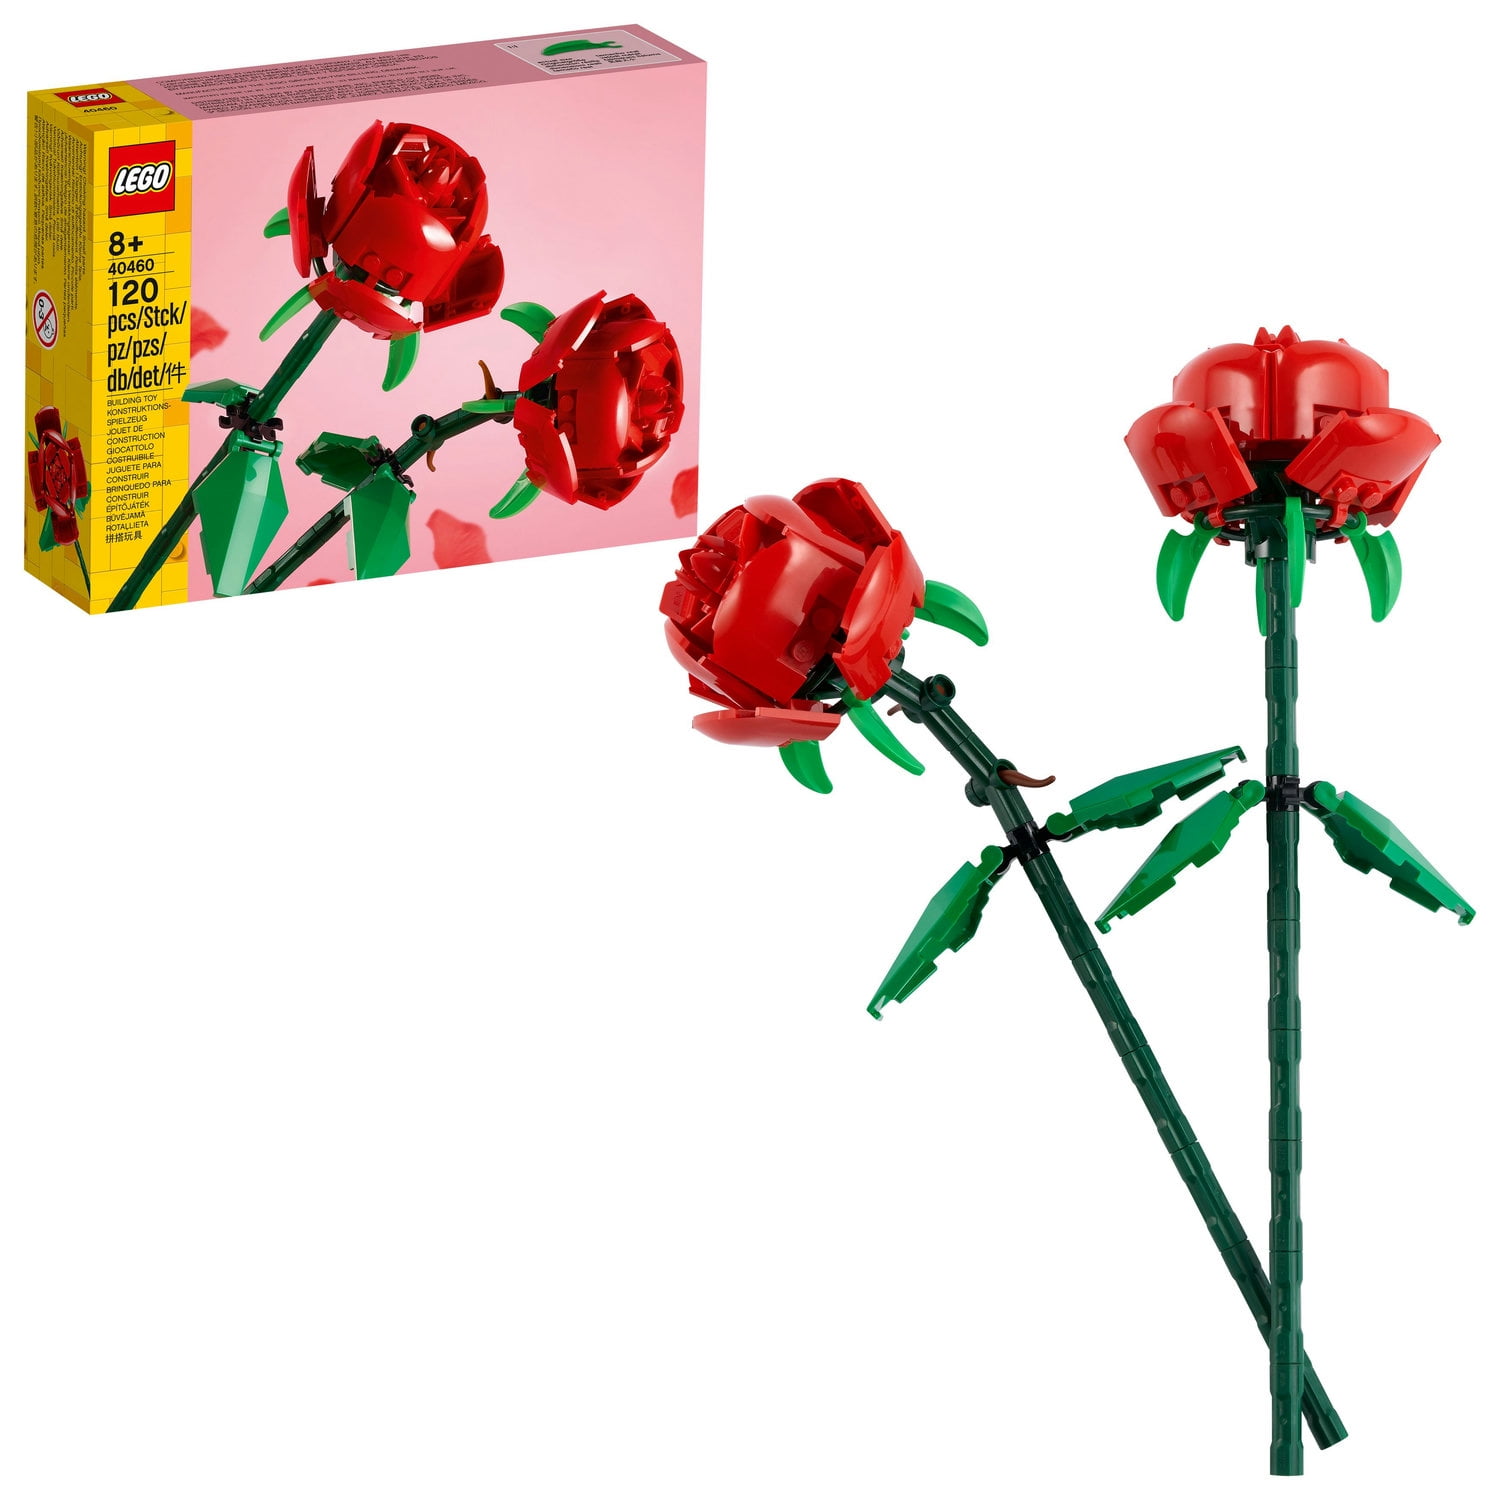 LEGO's bestselling Flower Bouquet building kit is on sale at